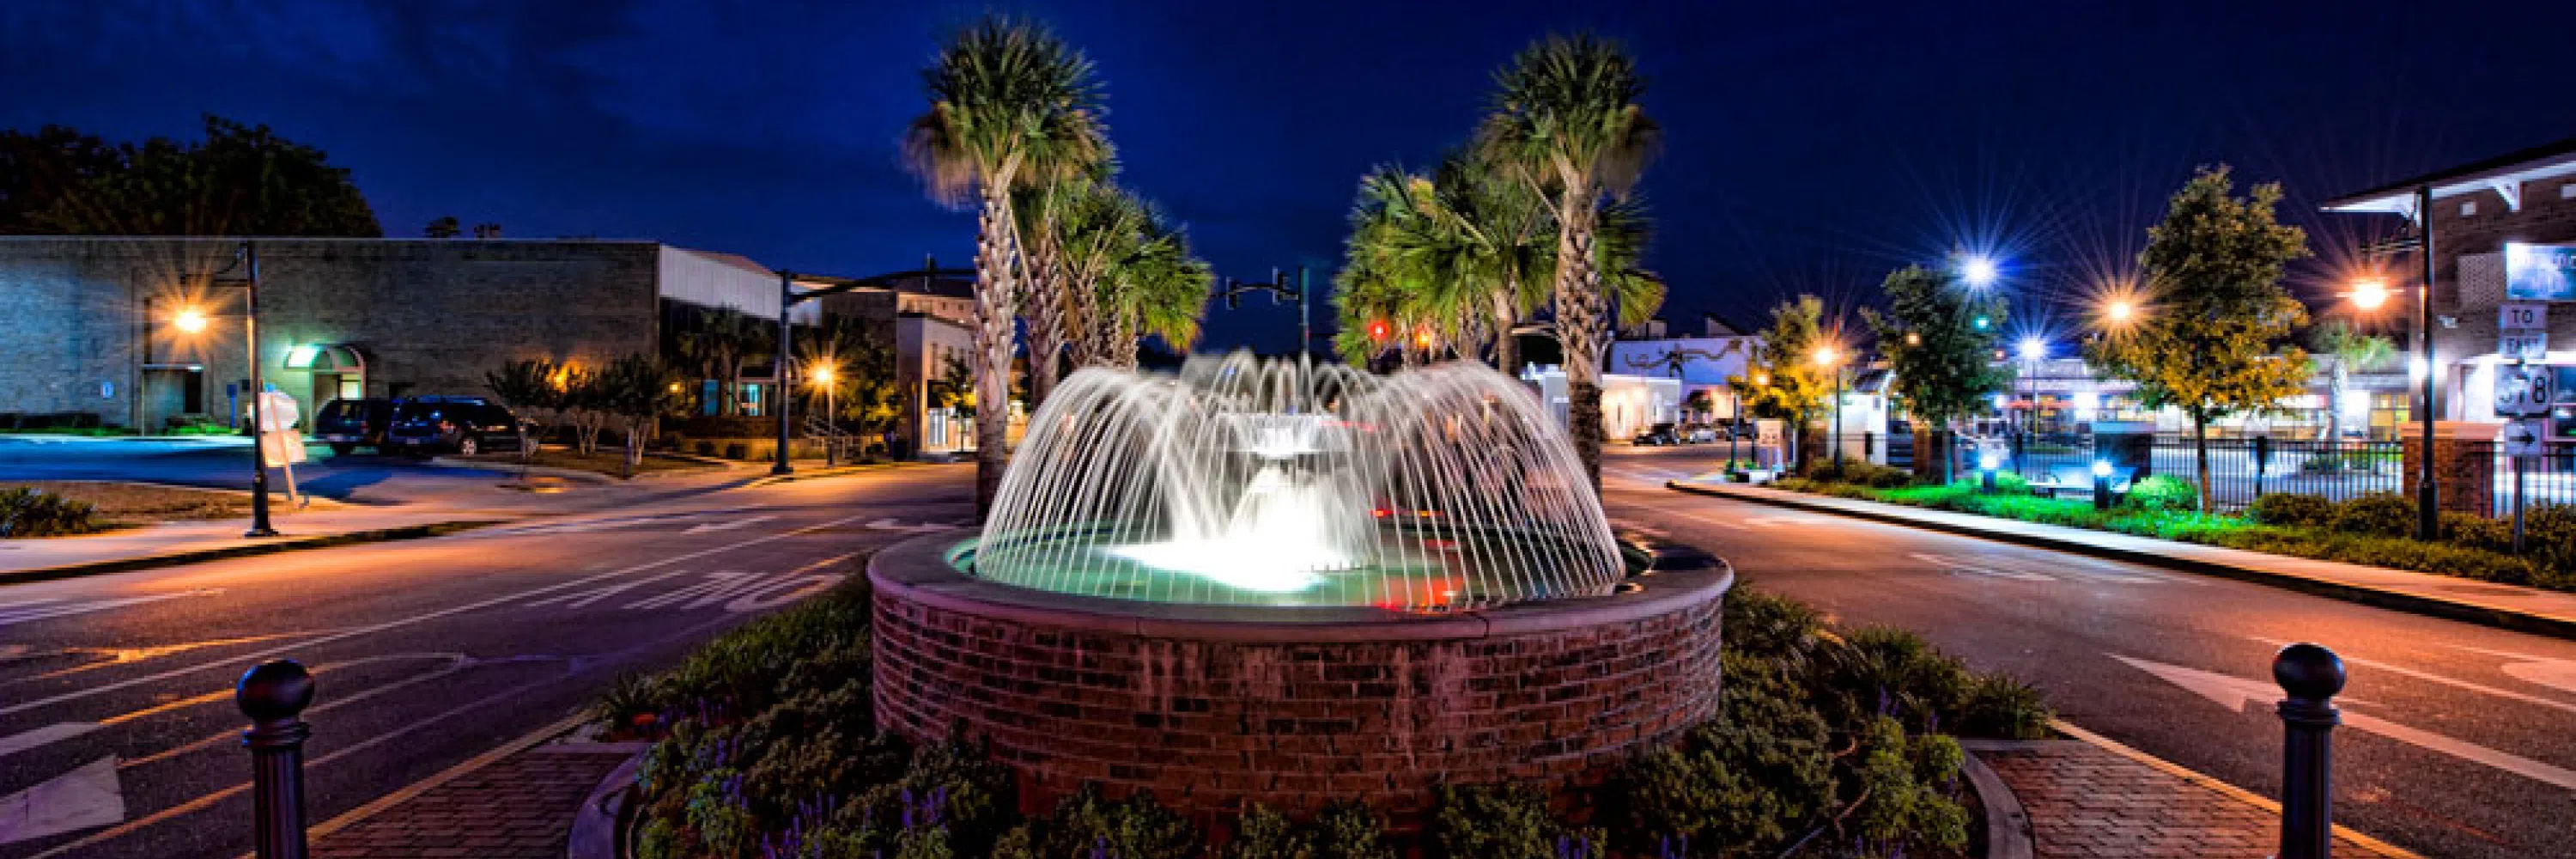 View of the fountain in Five Points during the evening